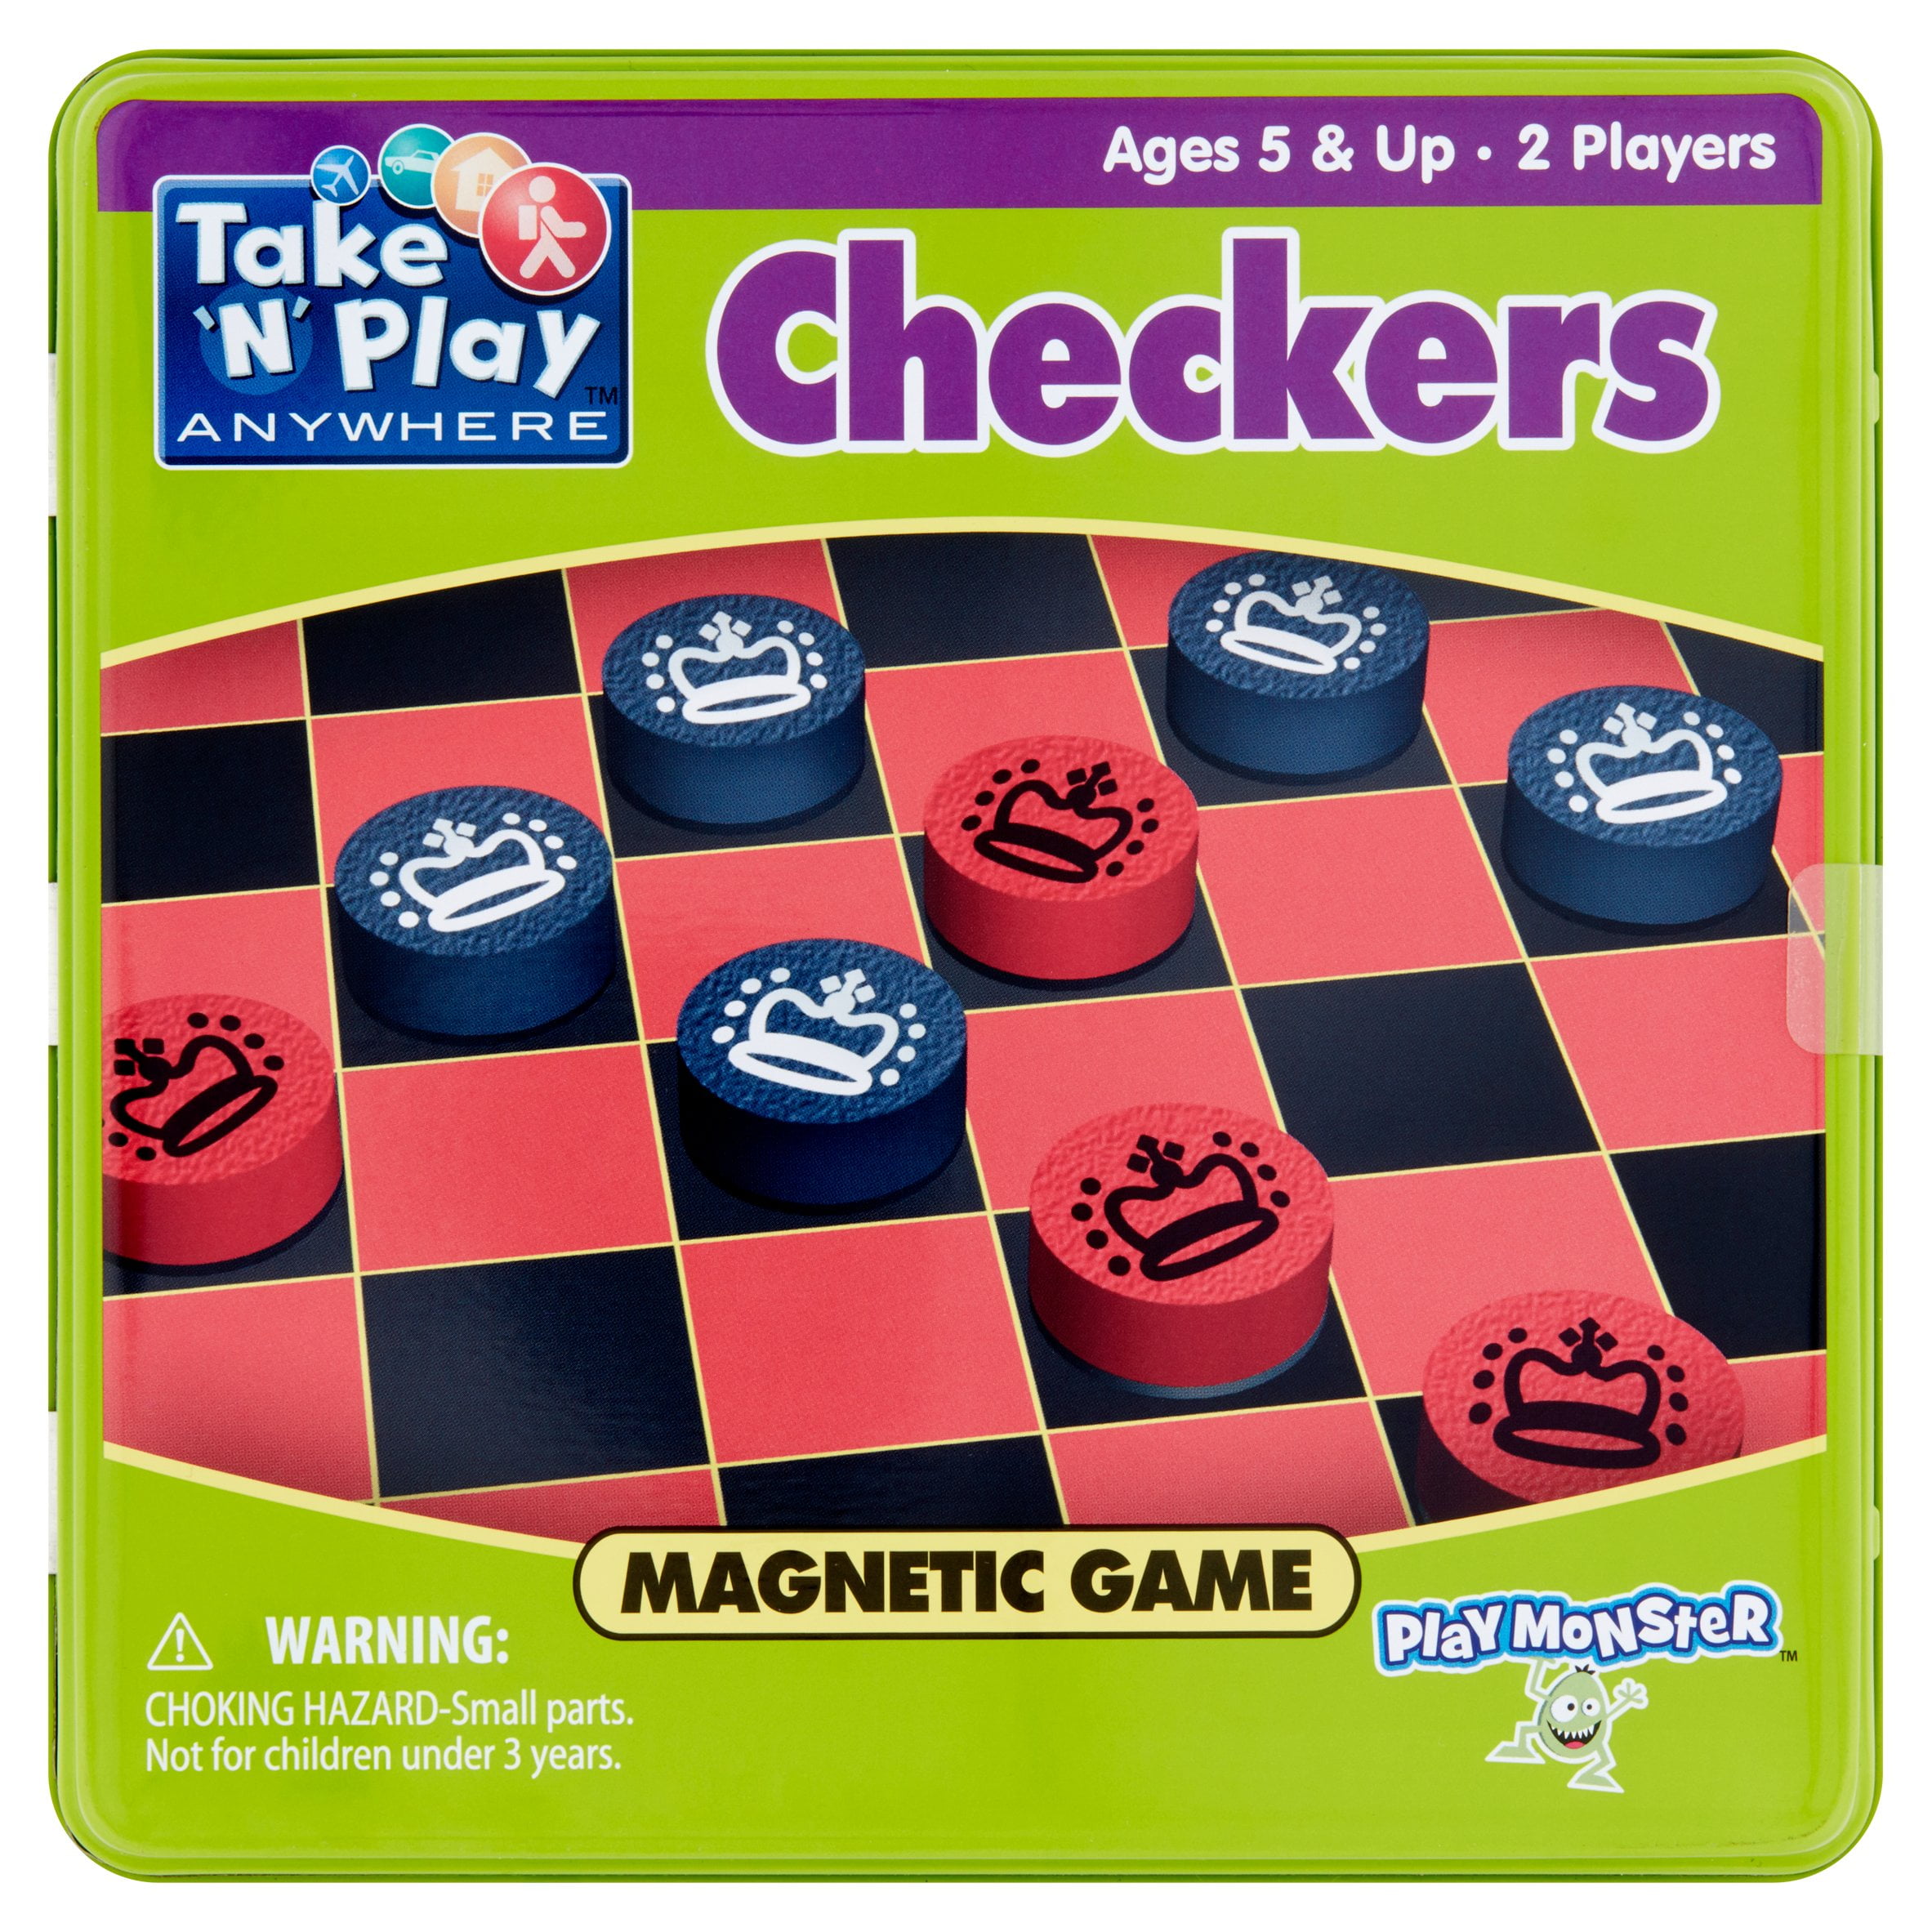 Pressman Toy Checkers Folding Board Game-1 Pack 